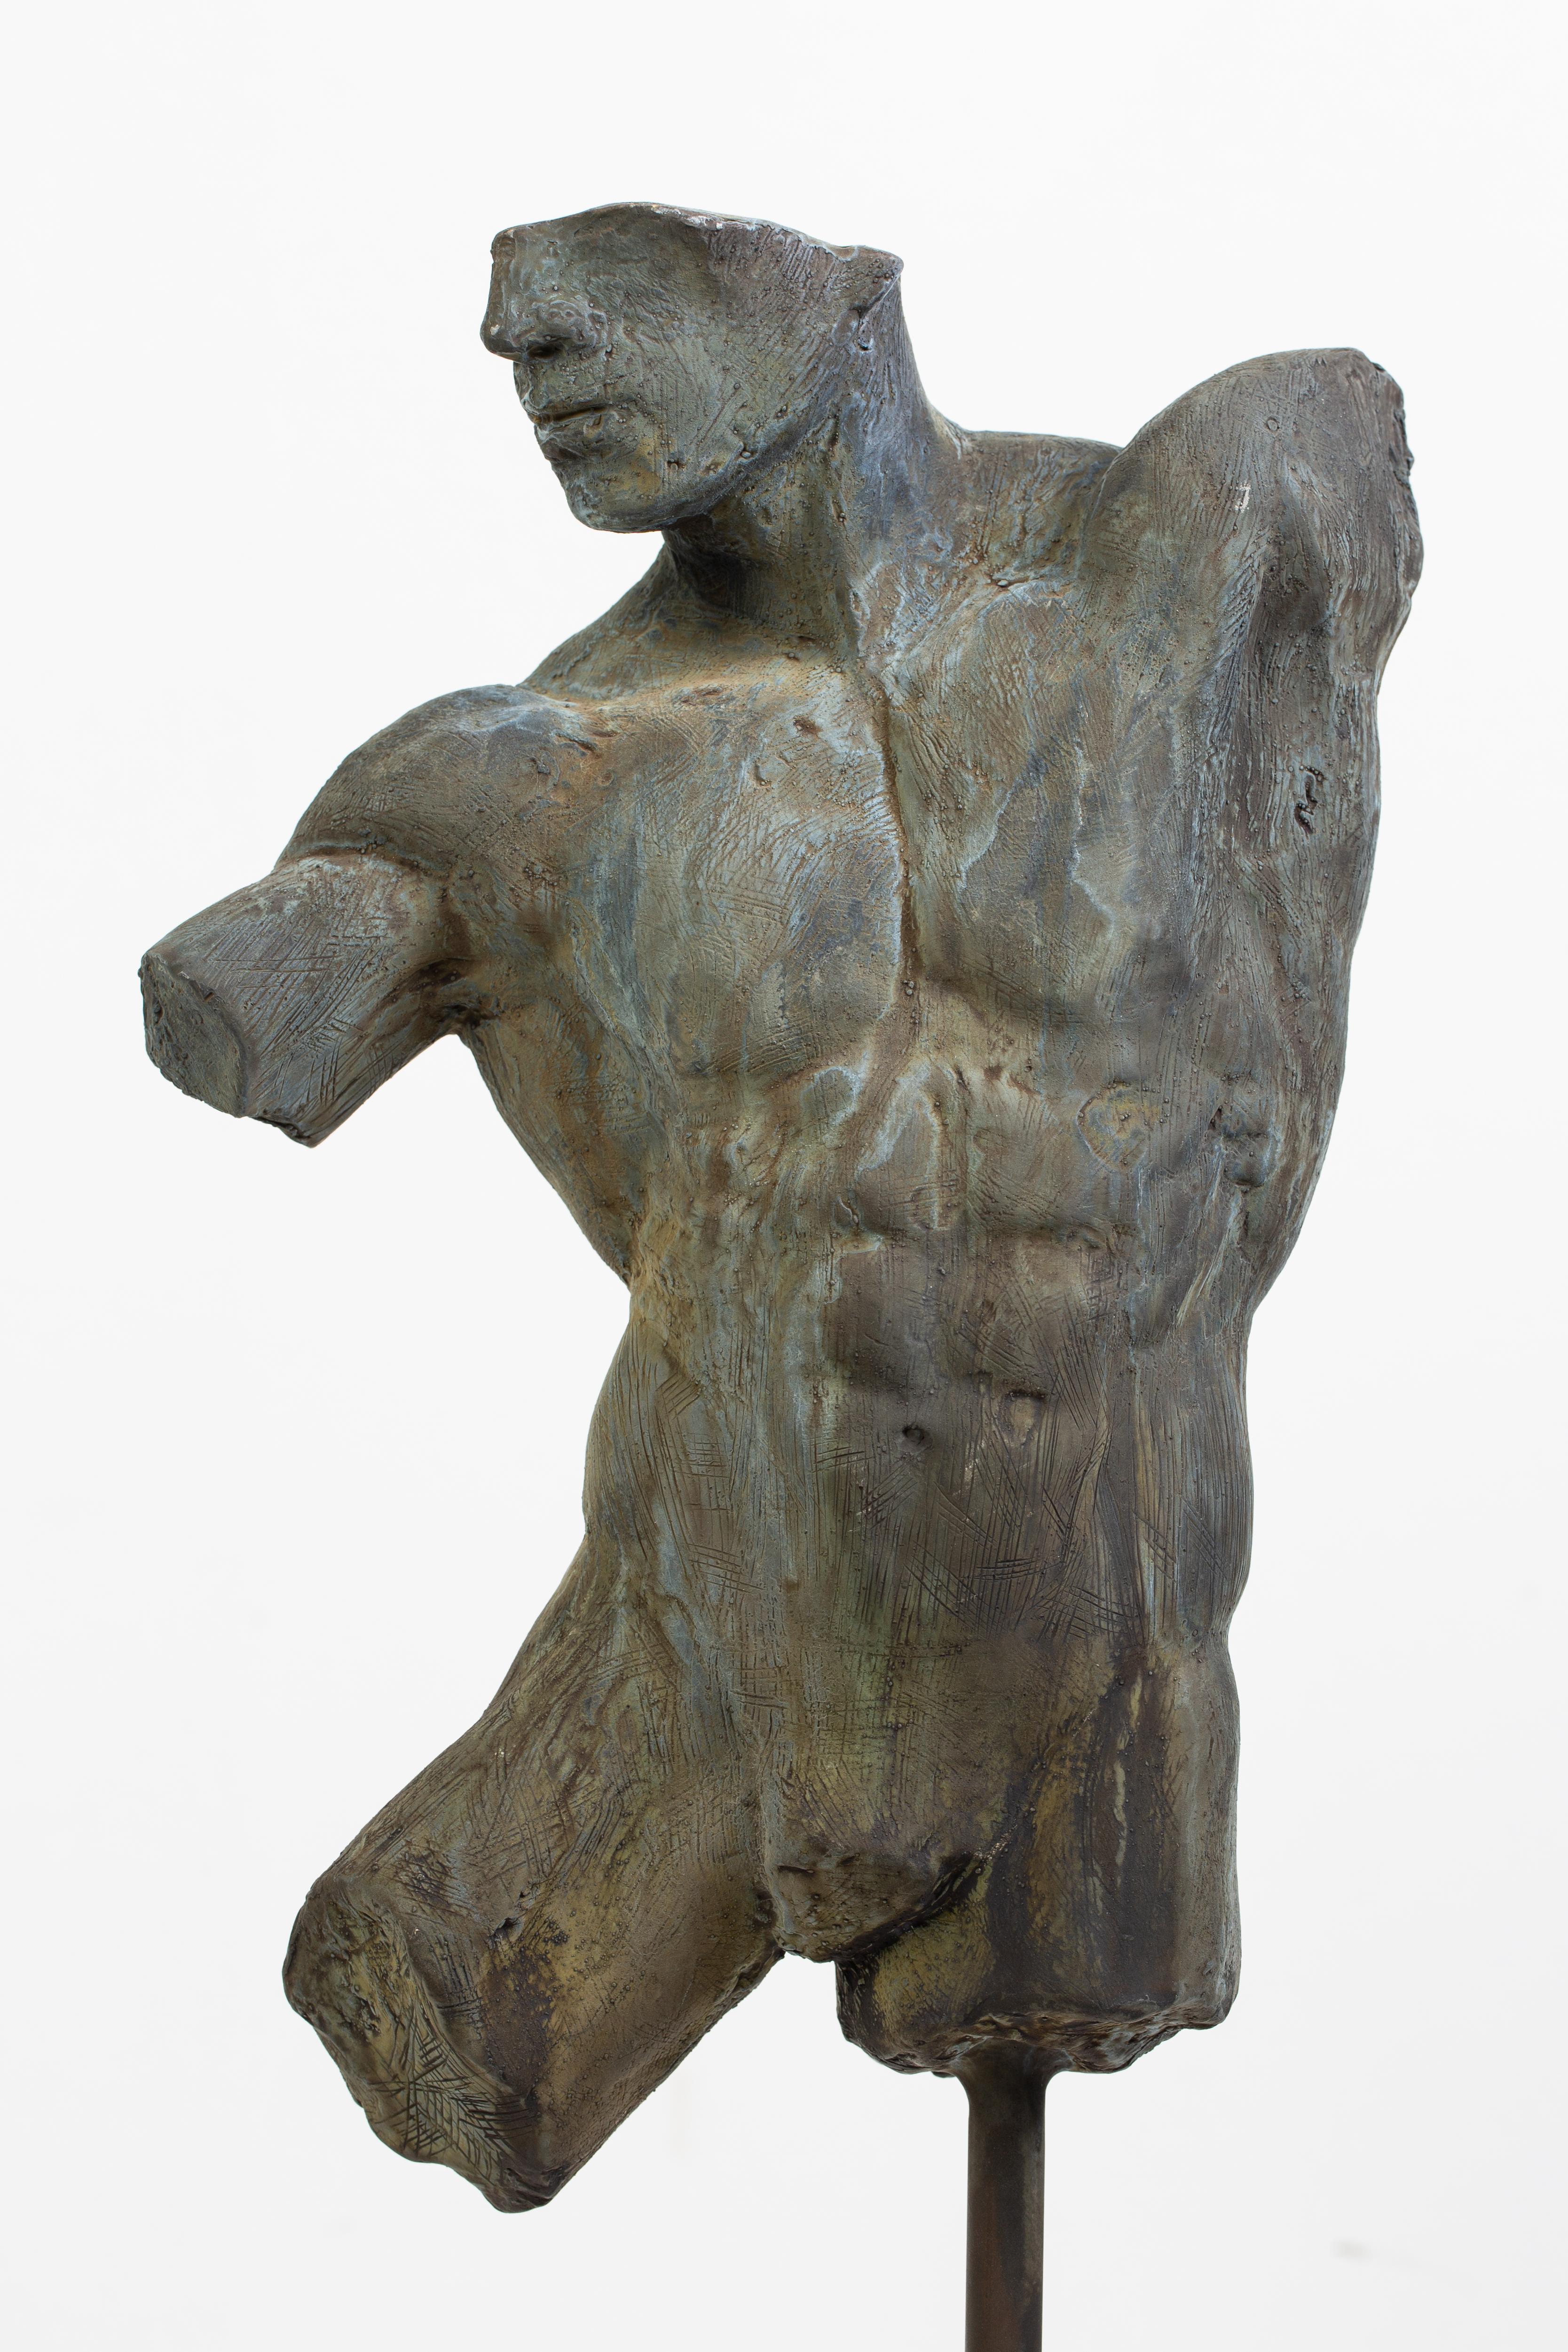 This is an extraordinary bronze sculpture of a Classic male nude fragment by artist Dean Kugler with a verdigris patina.  Attention to detail and complete understanding of the human figure are evident. The sculpture is beautifully custom mounted on